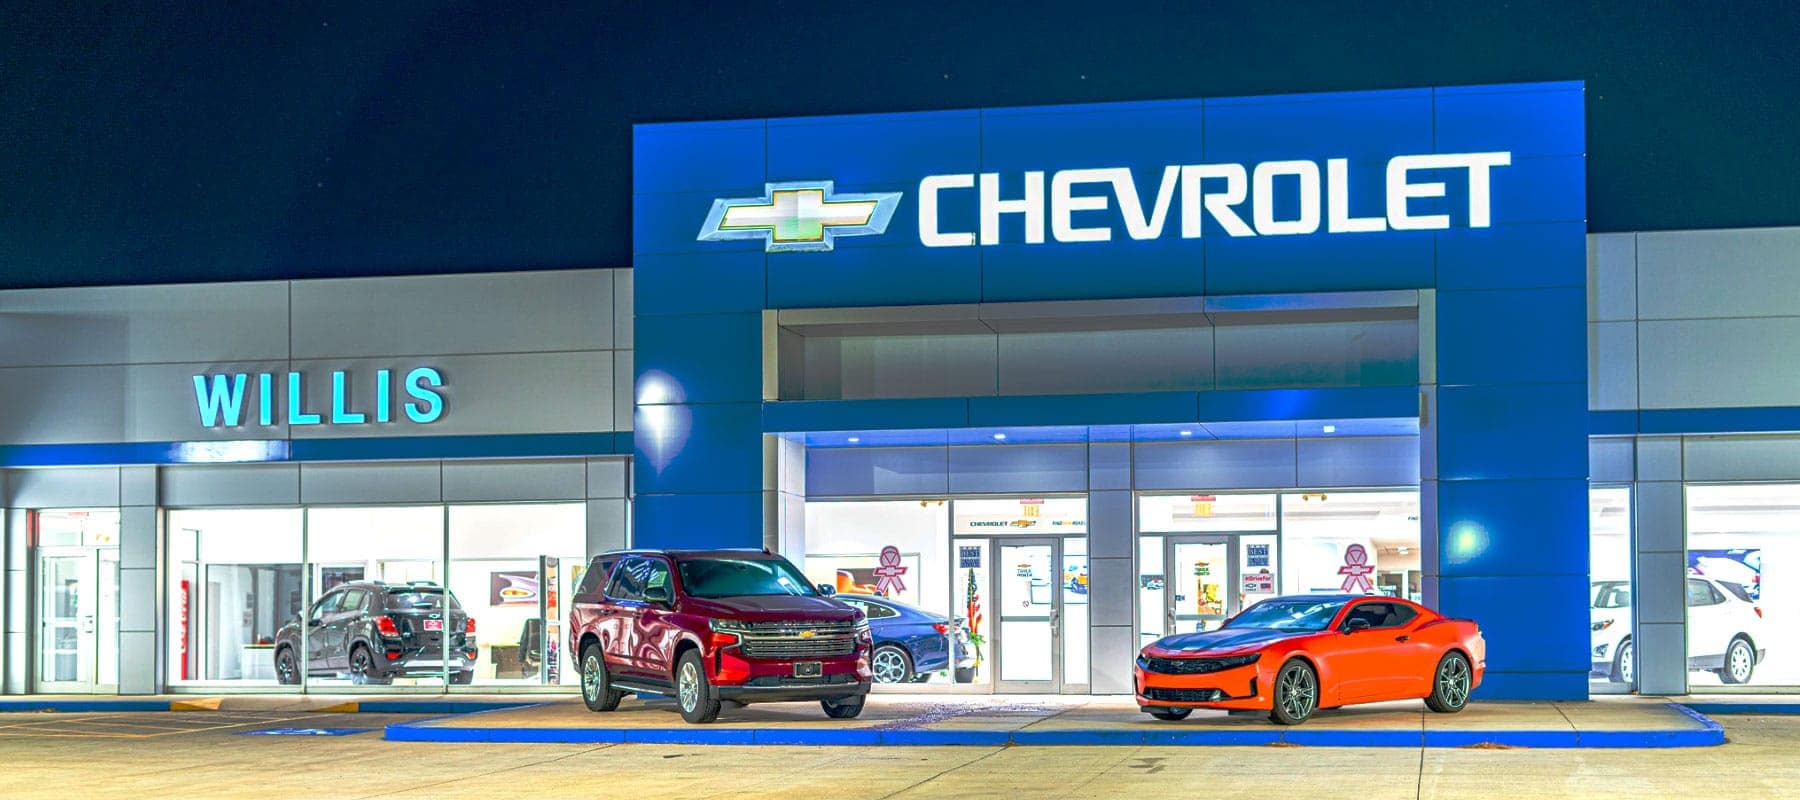 Front view of the dealership at night